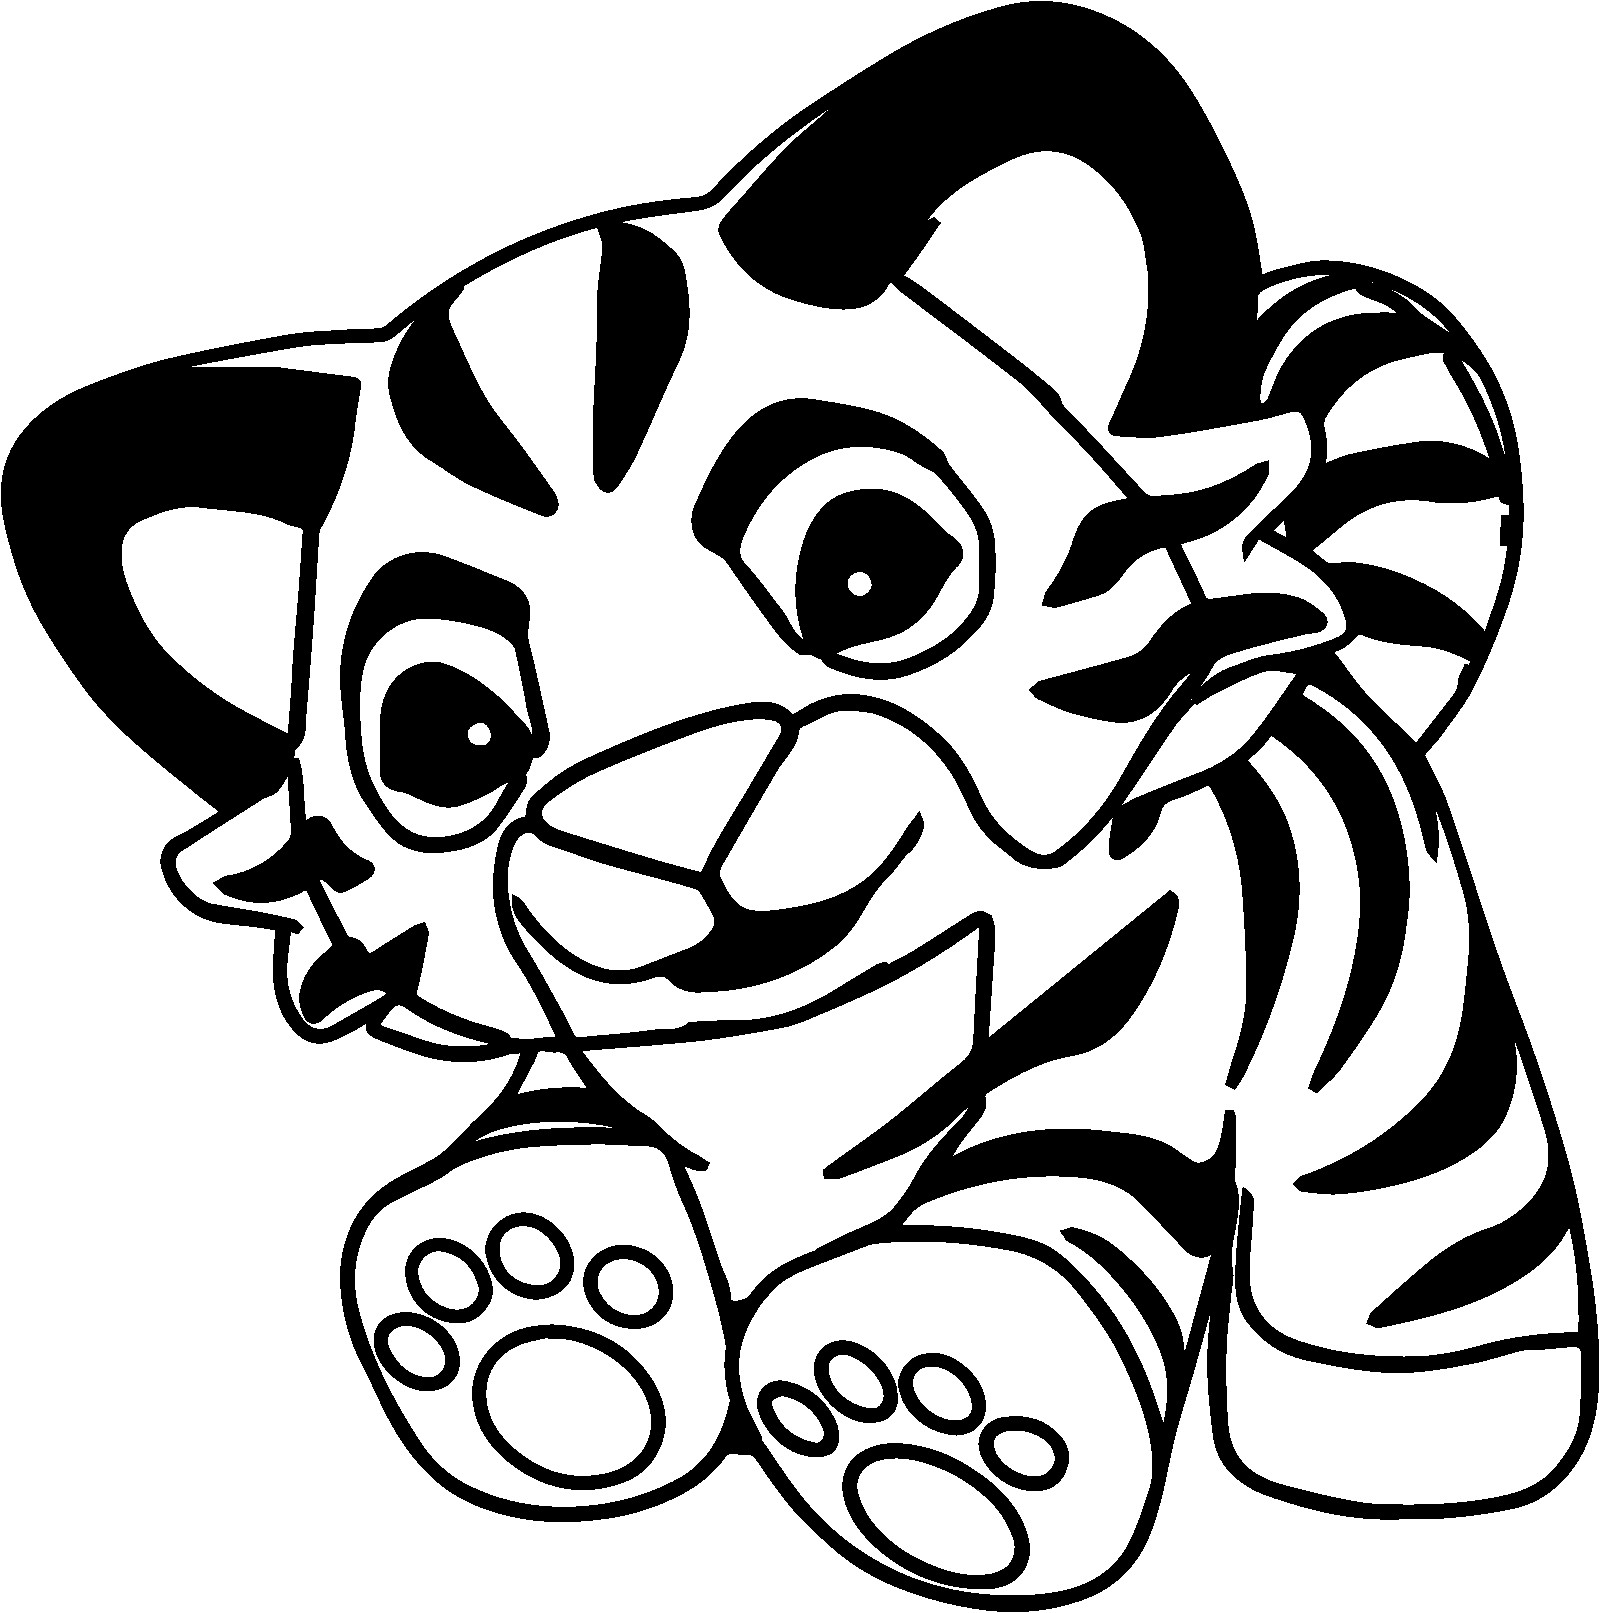 Cute Baby Tiger Coloring Pages
 Walking Baby Tiger Coloring Page